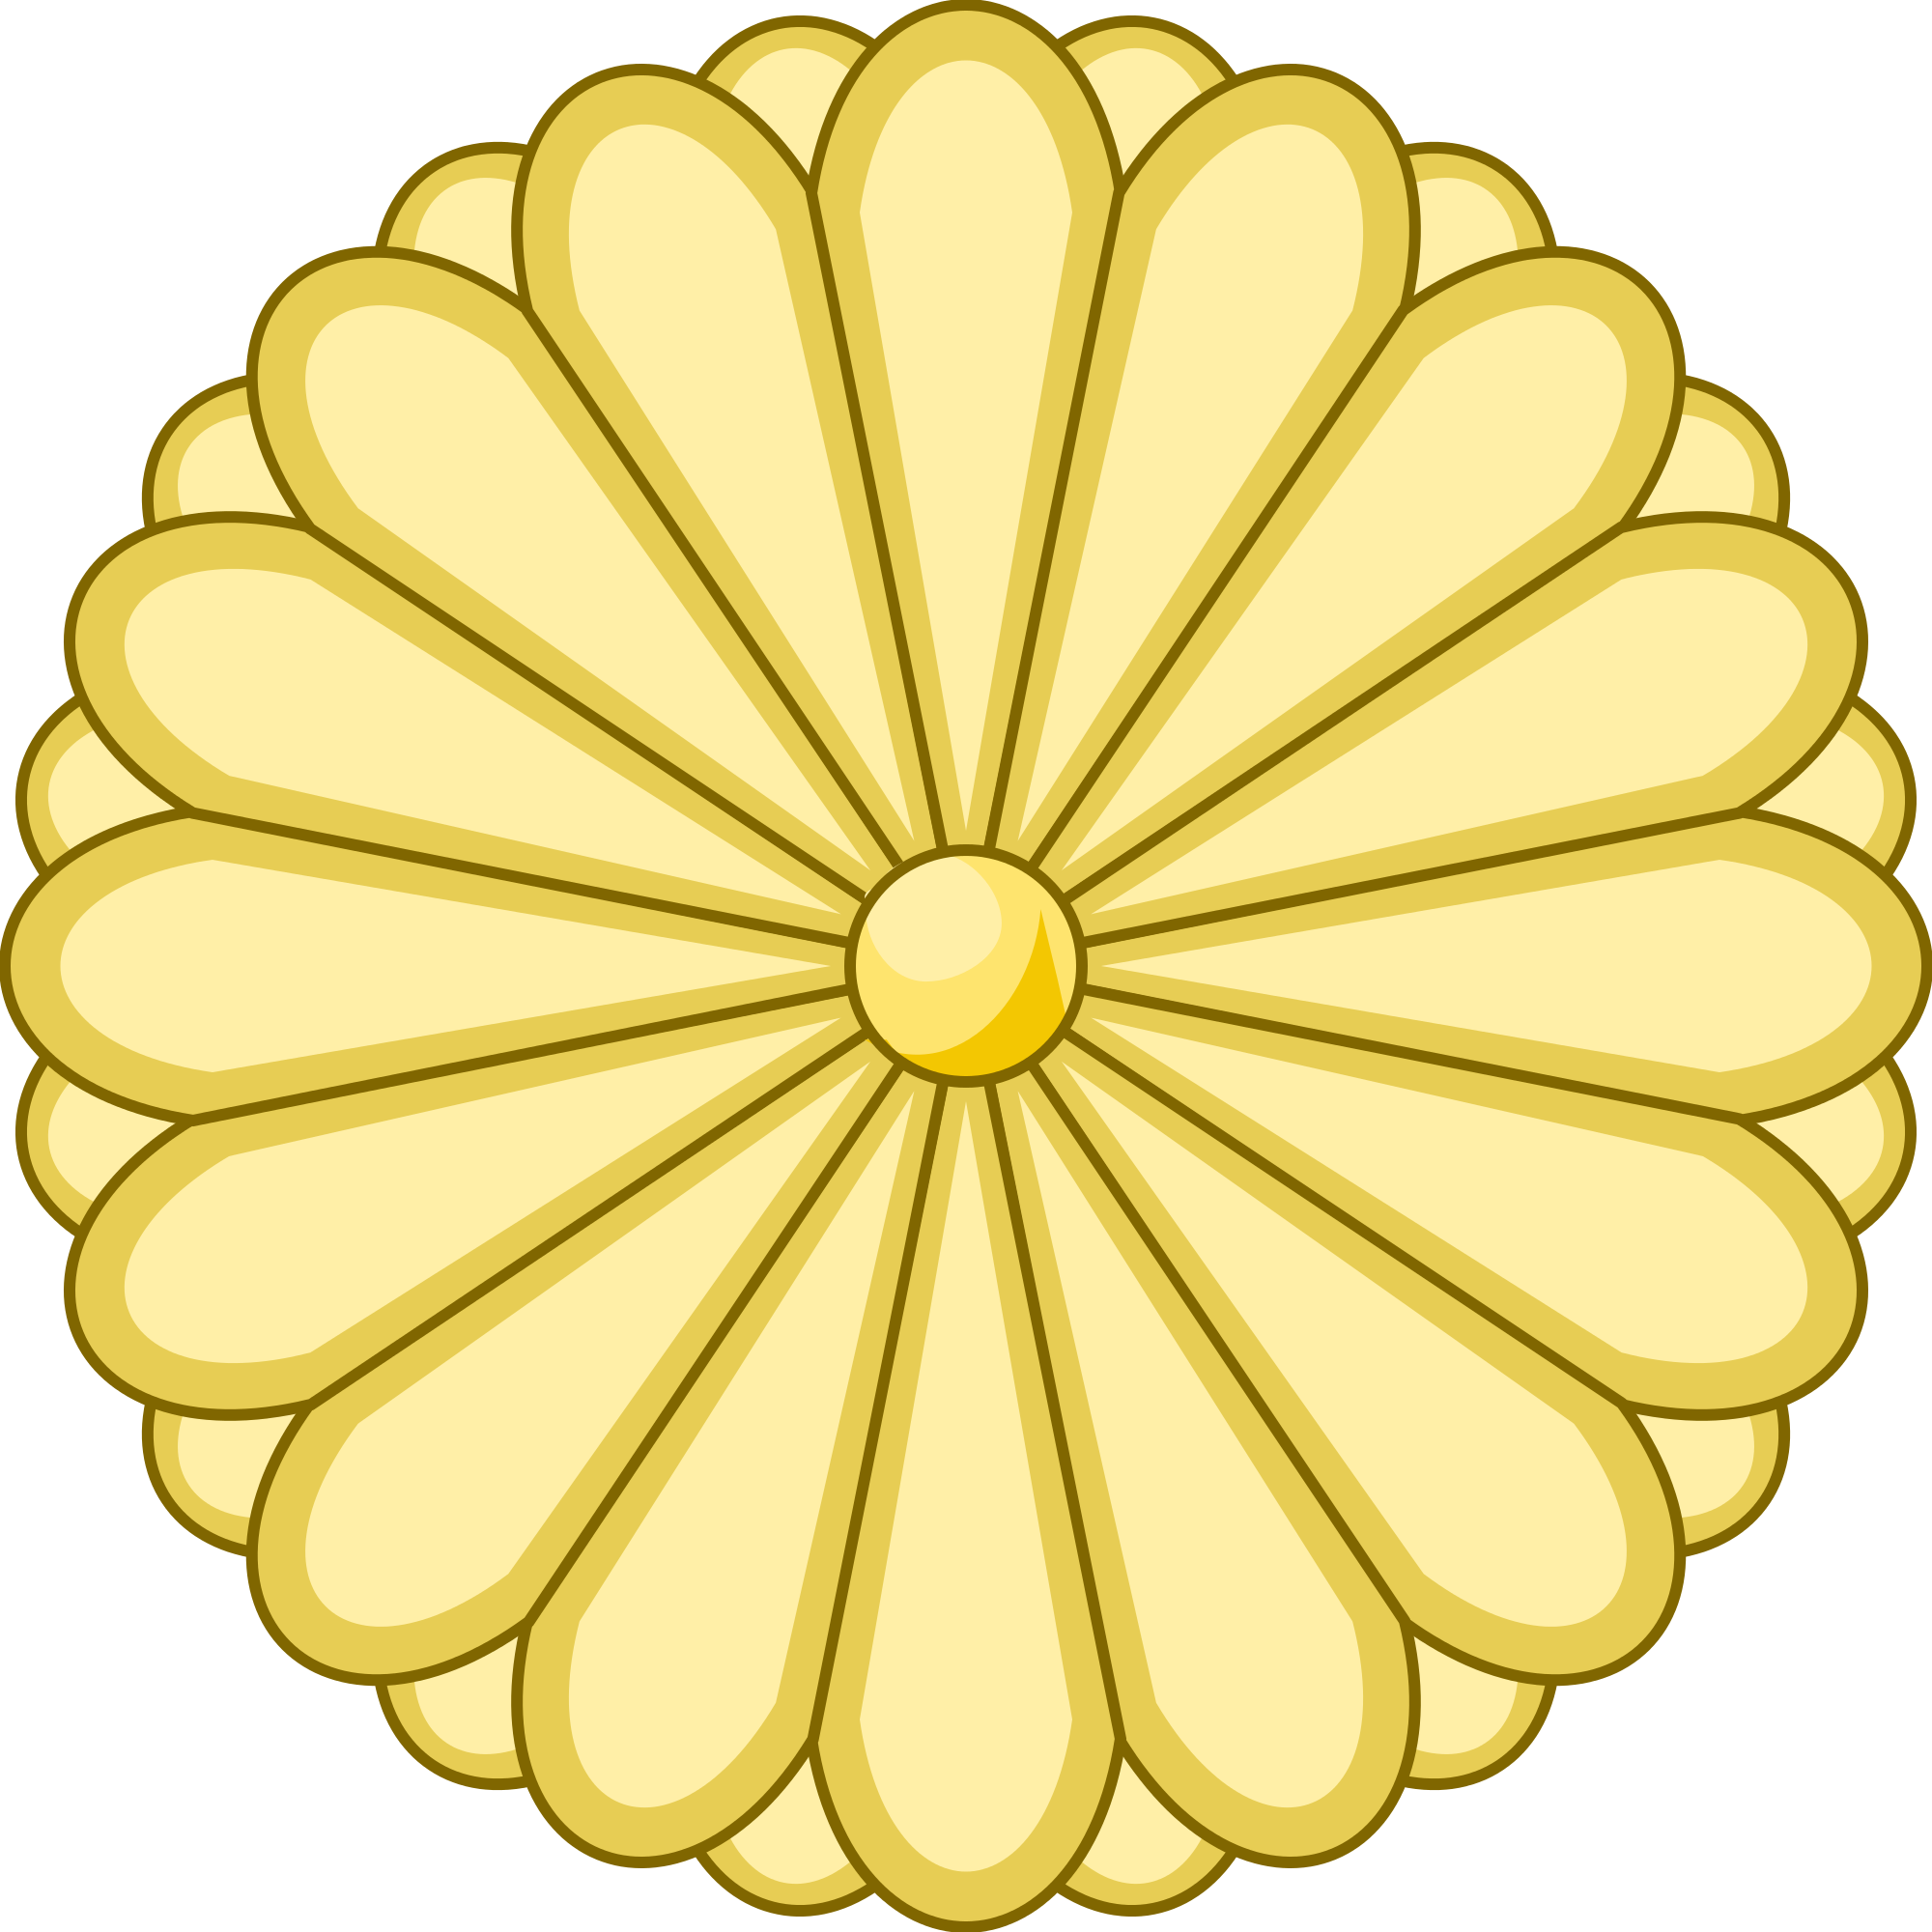 File:Japanese Imperial Seal.svg - Wikimedia Commons